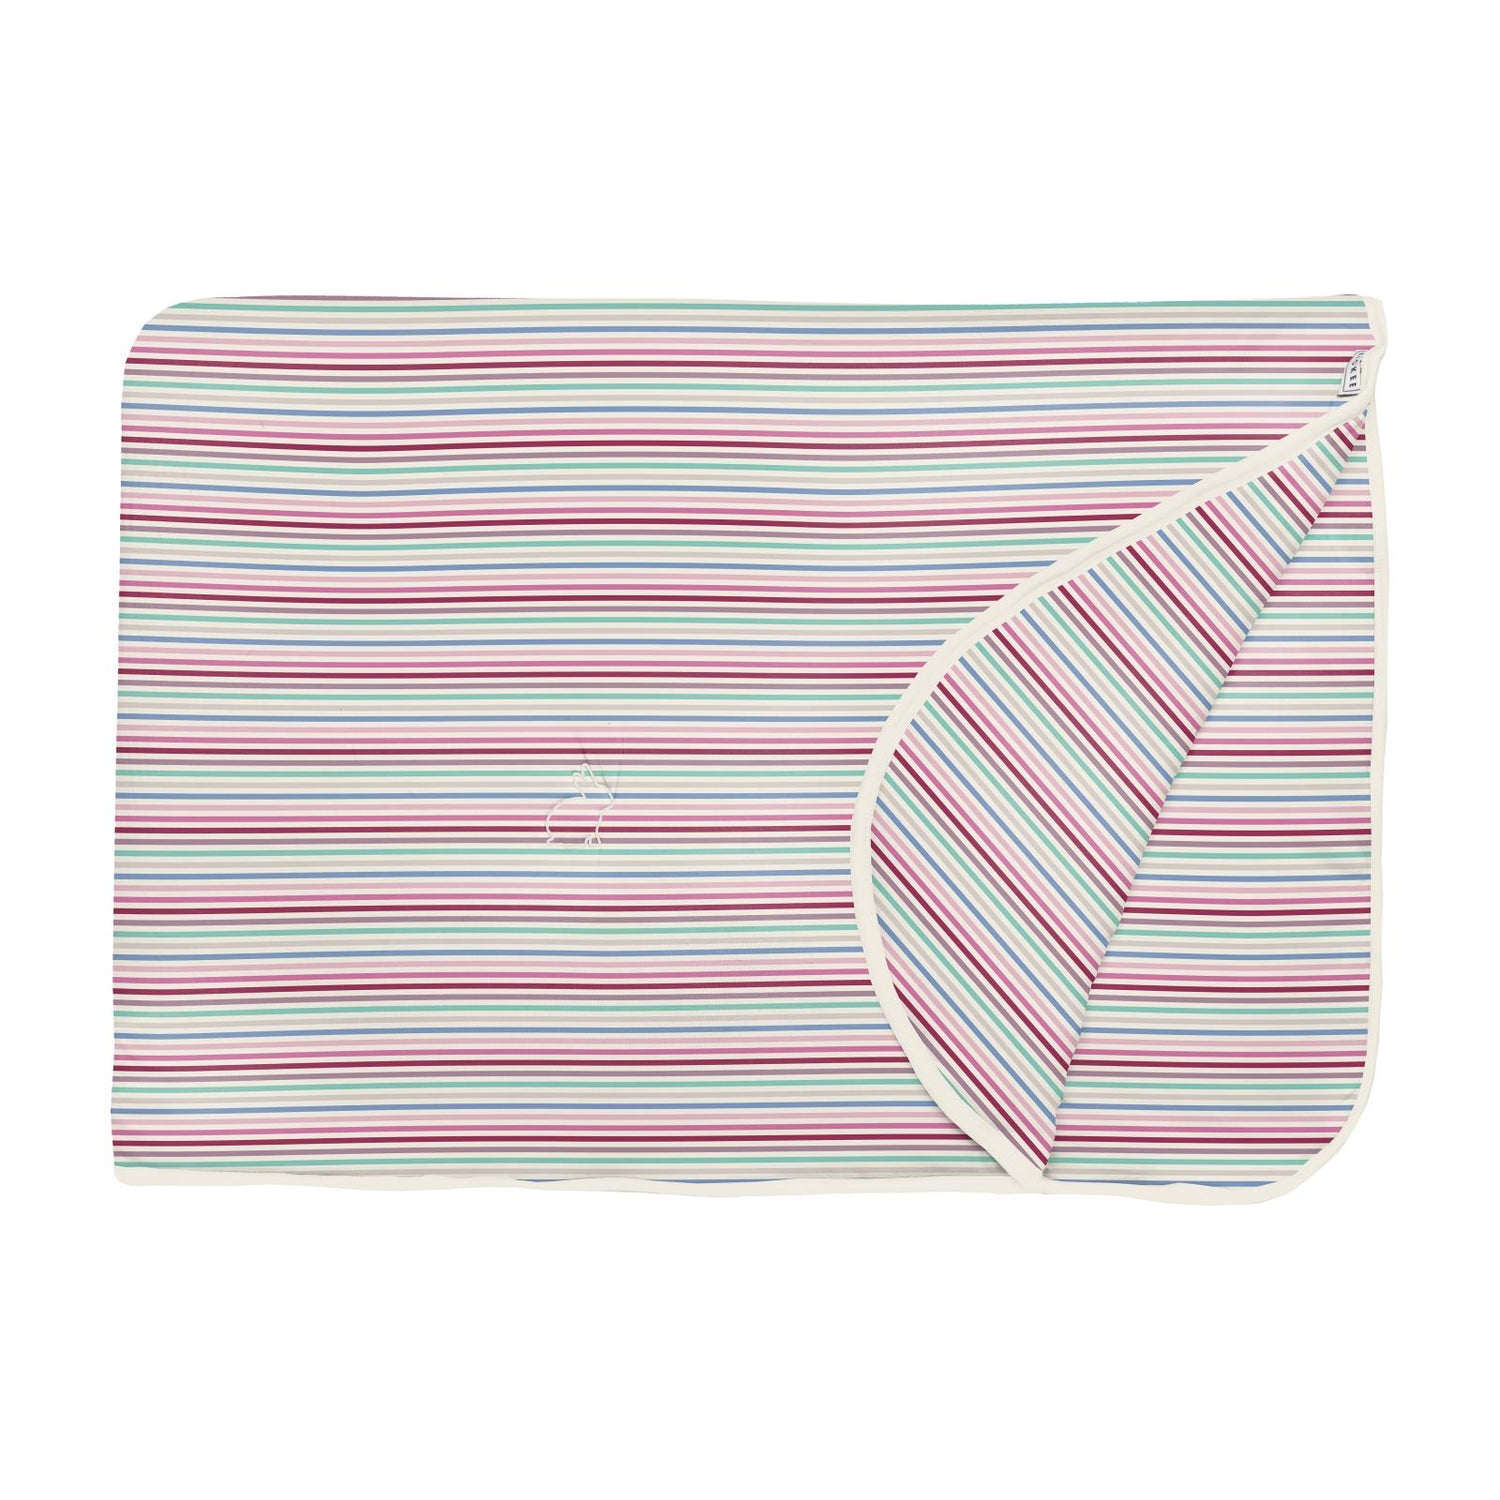 Print Fluffle Throw Blanket with Embroidery in Make Believe Stripe